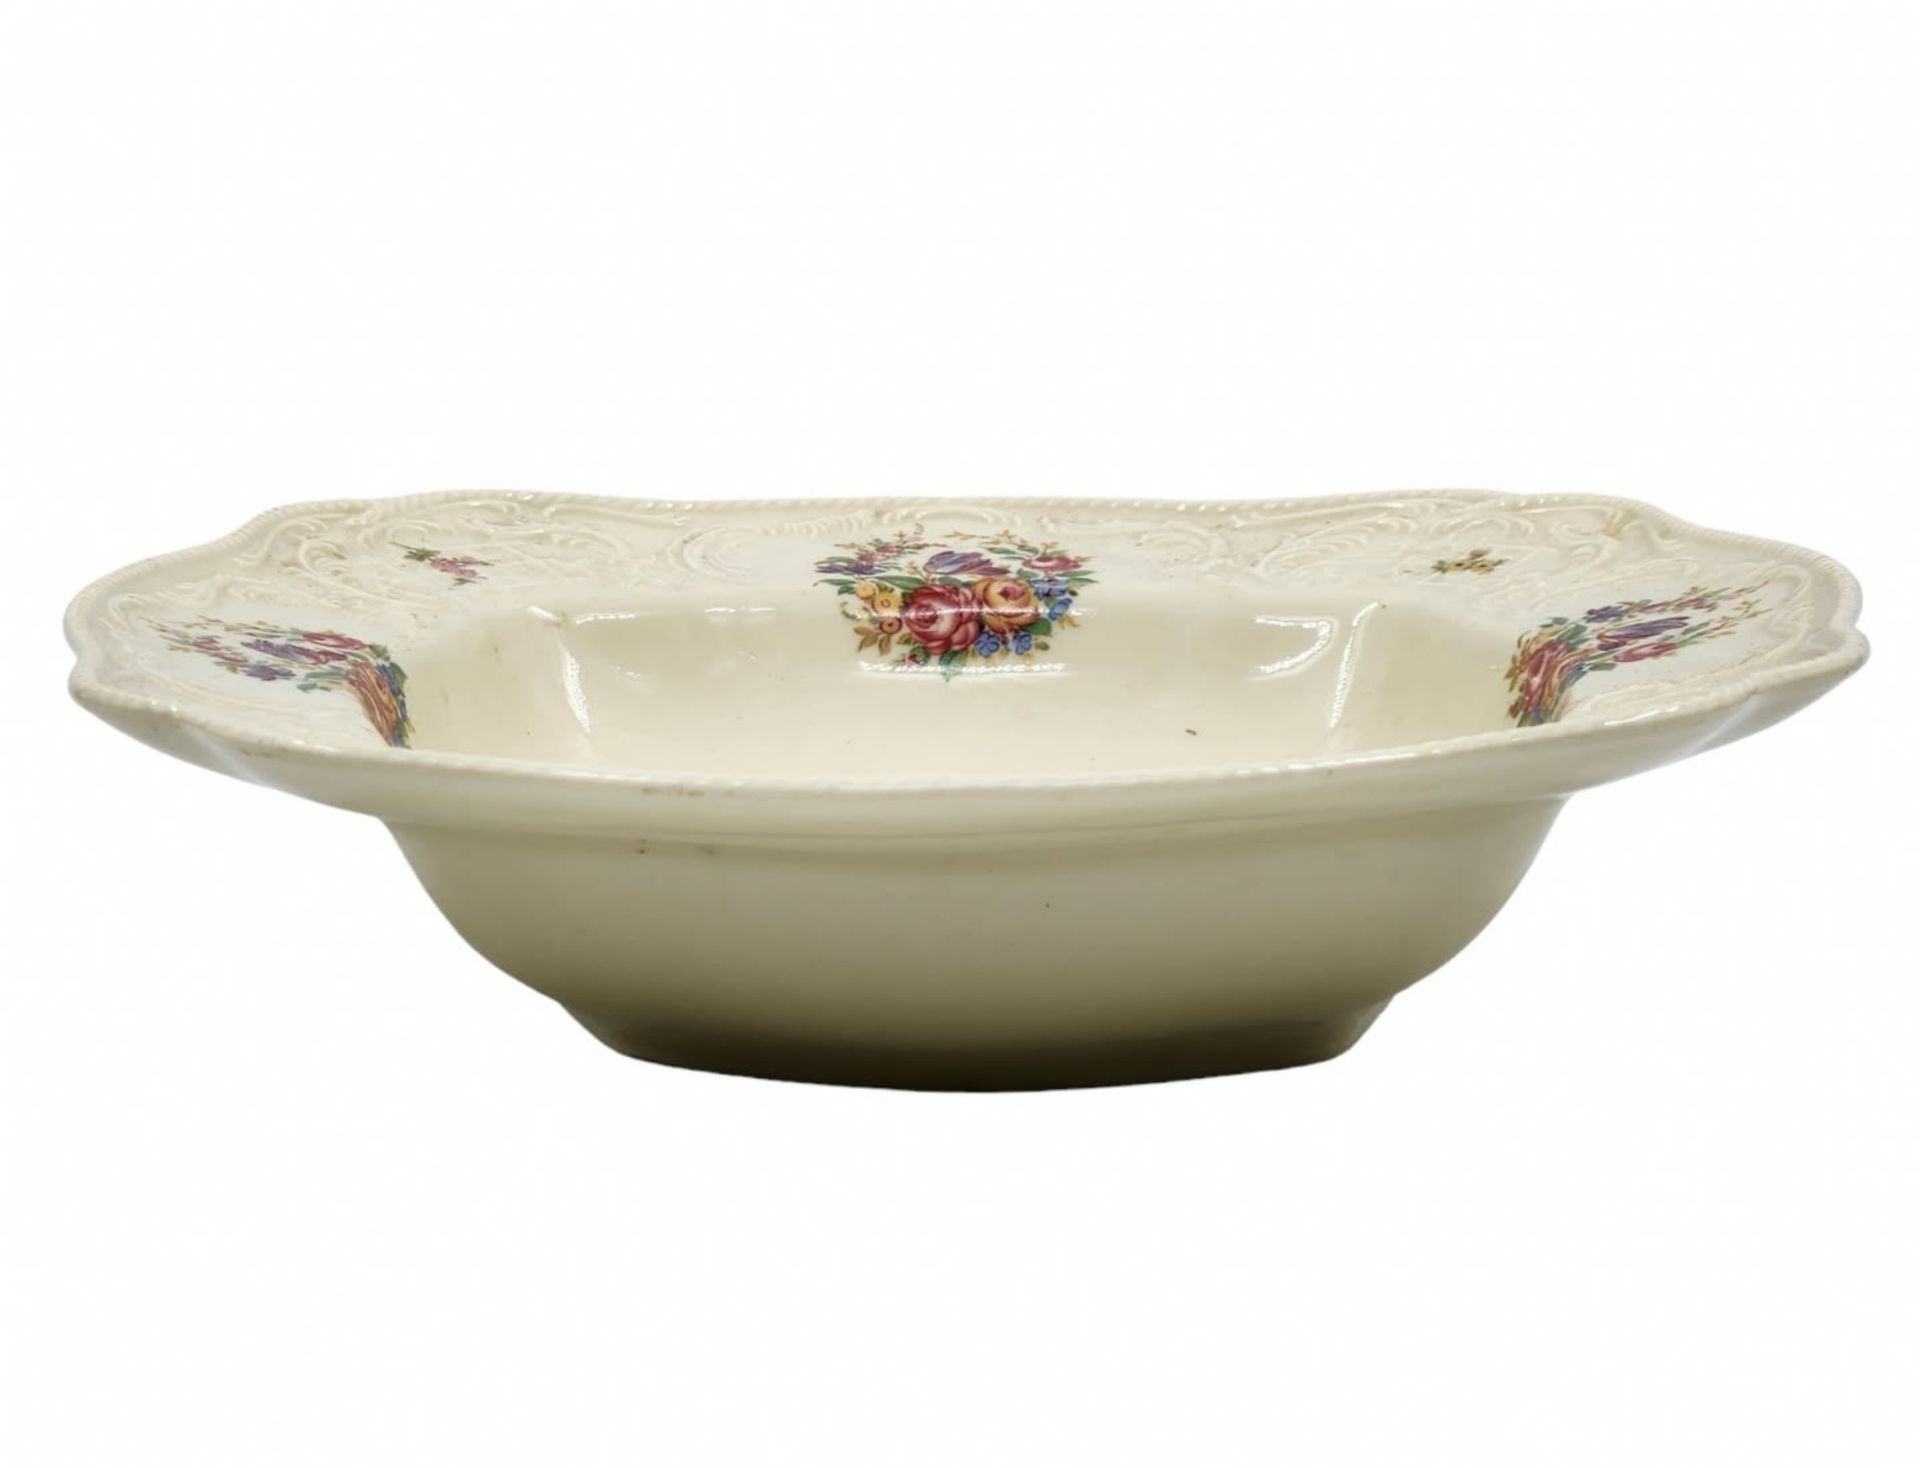 German porcelain bowl, made by 'Rosenthal', decorated with a floral print on a cream background, - Image 2 of 3